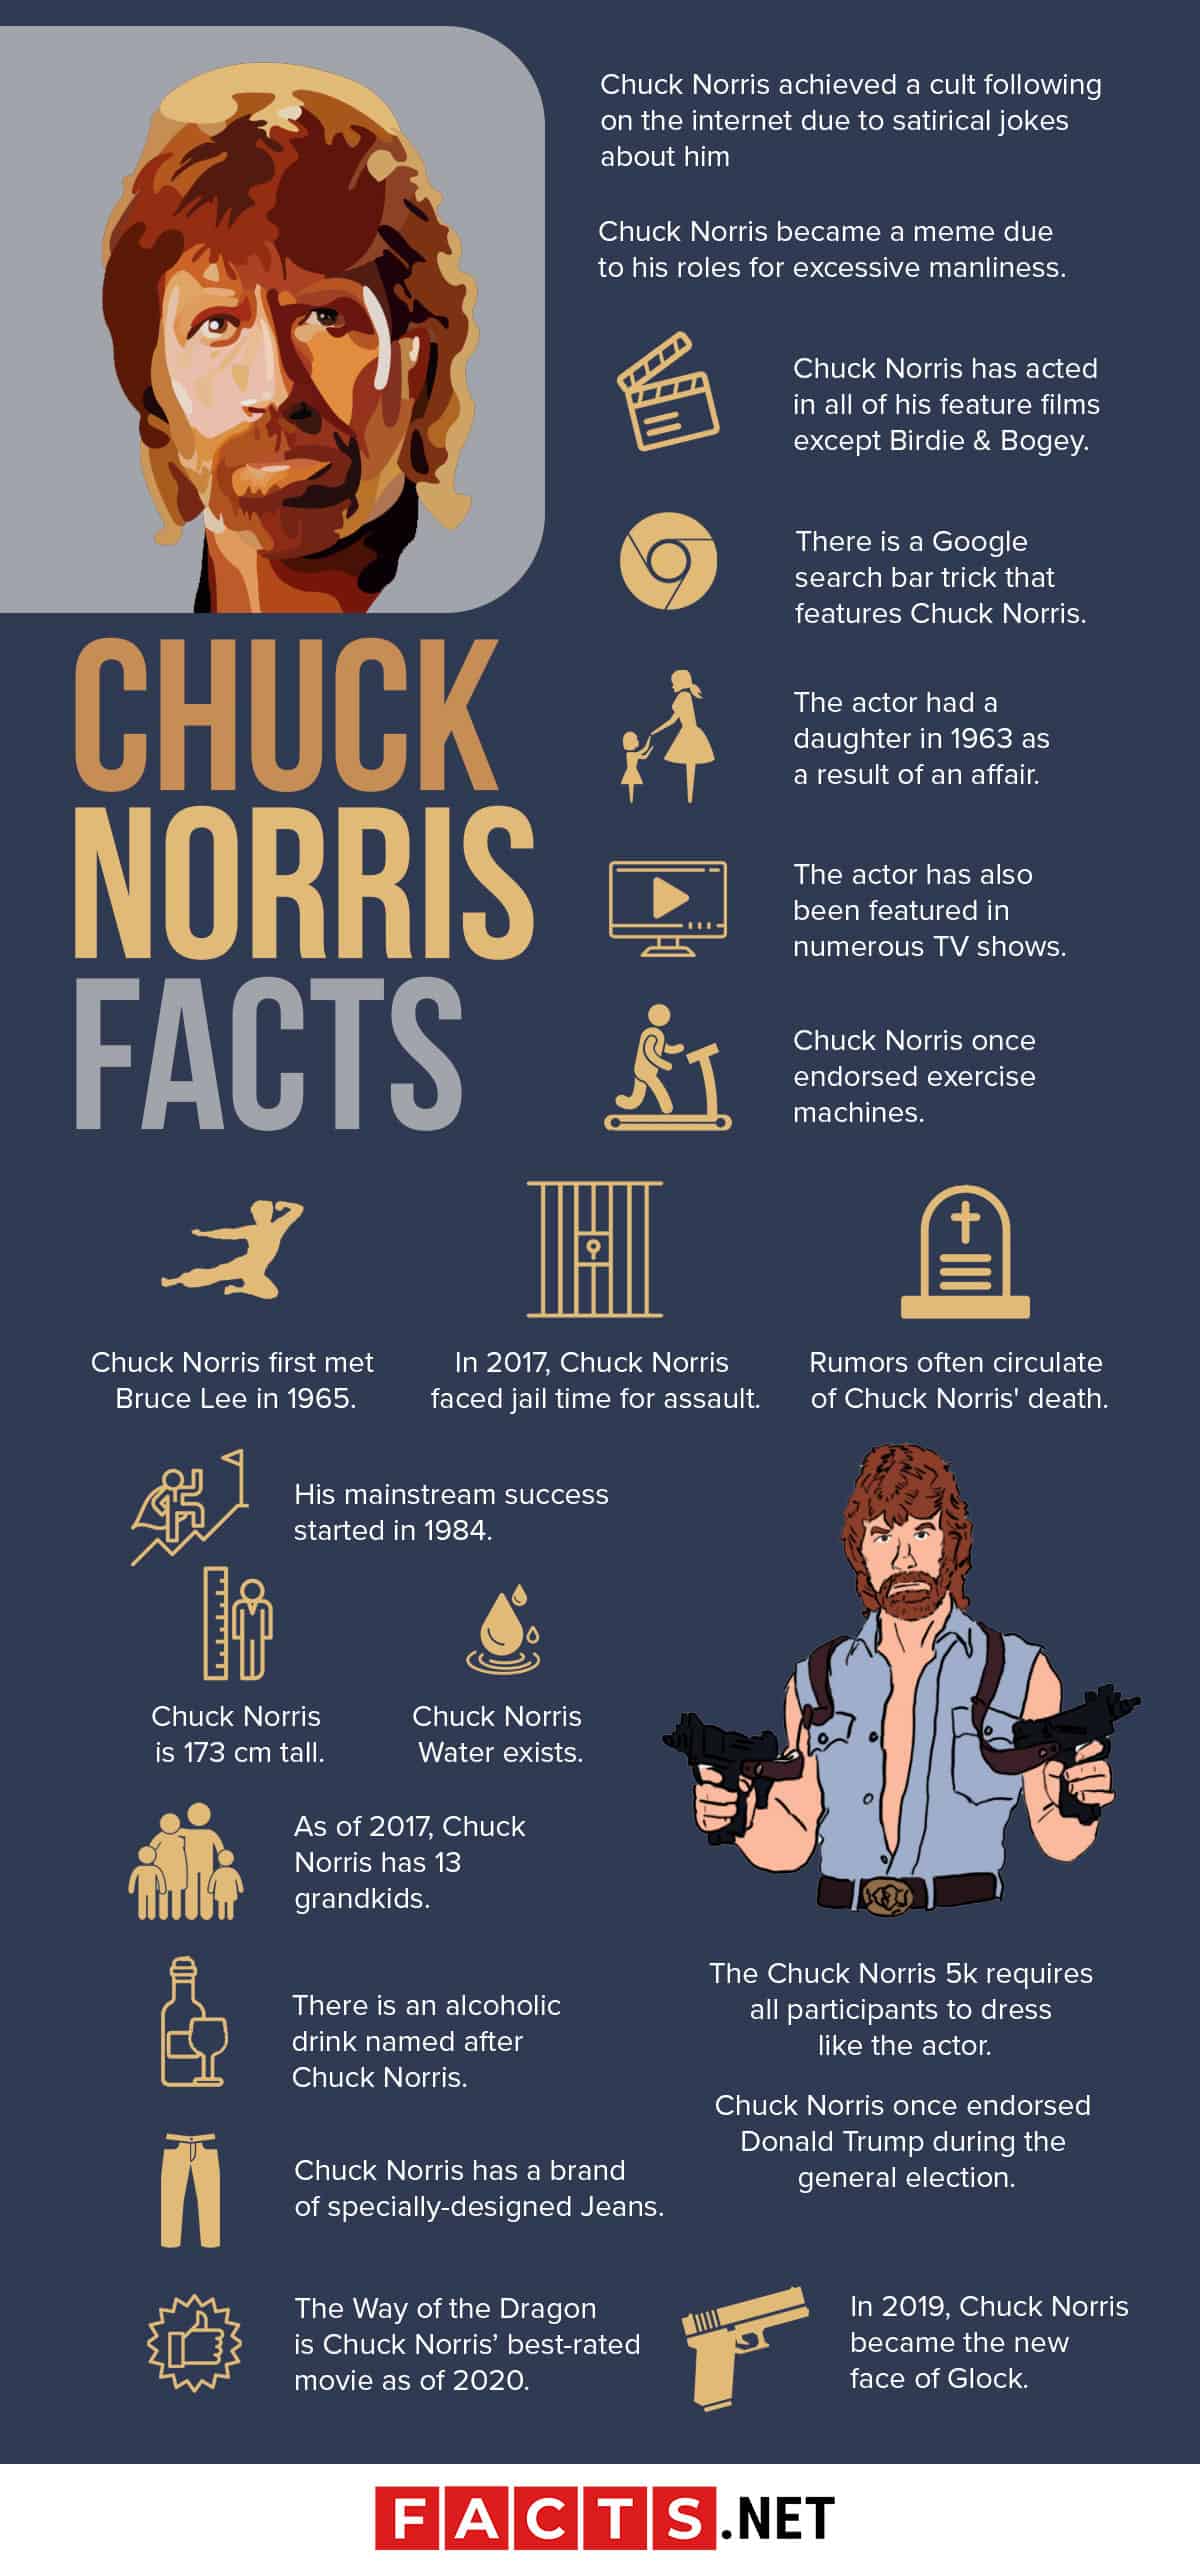 50 Chuck Norris Facts That Mainstream Media Won't Tell You